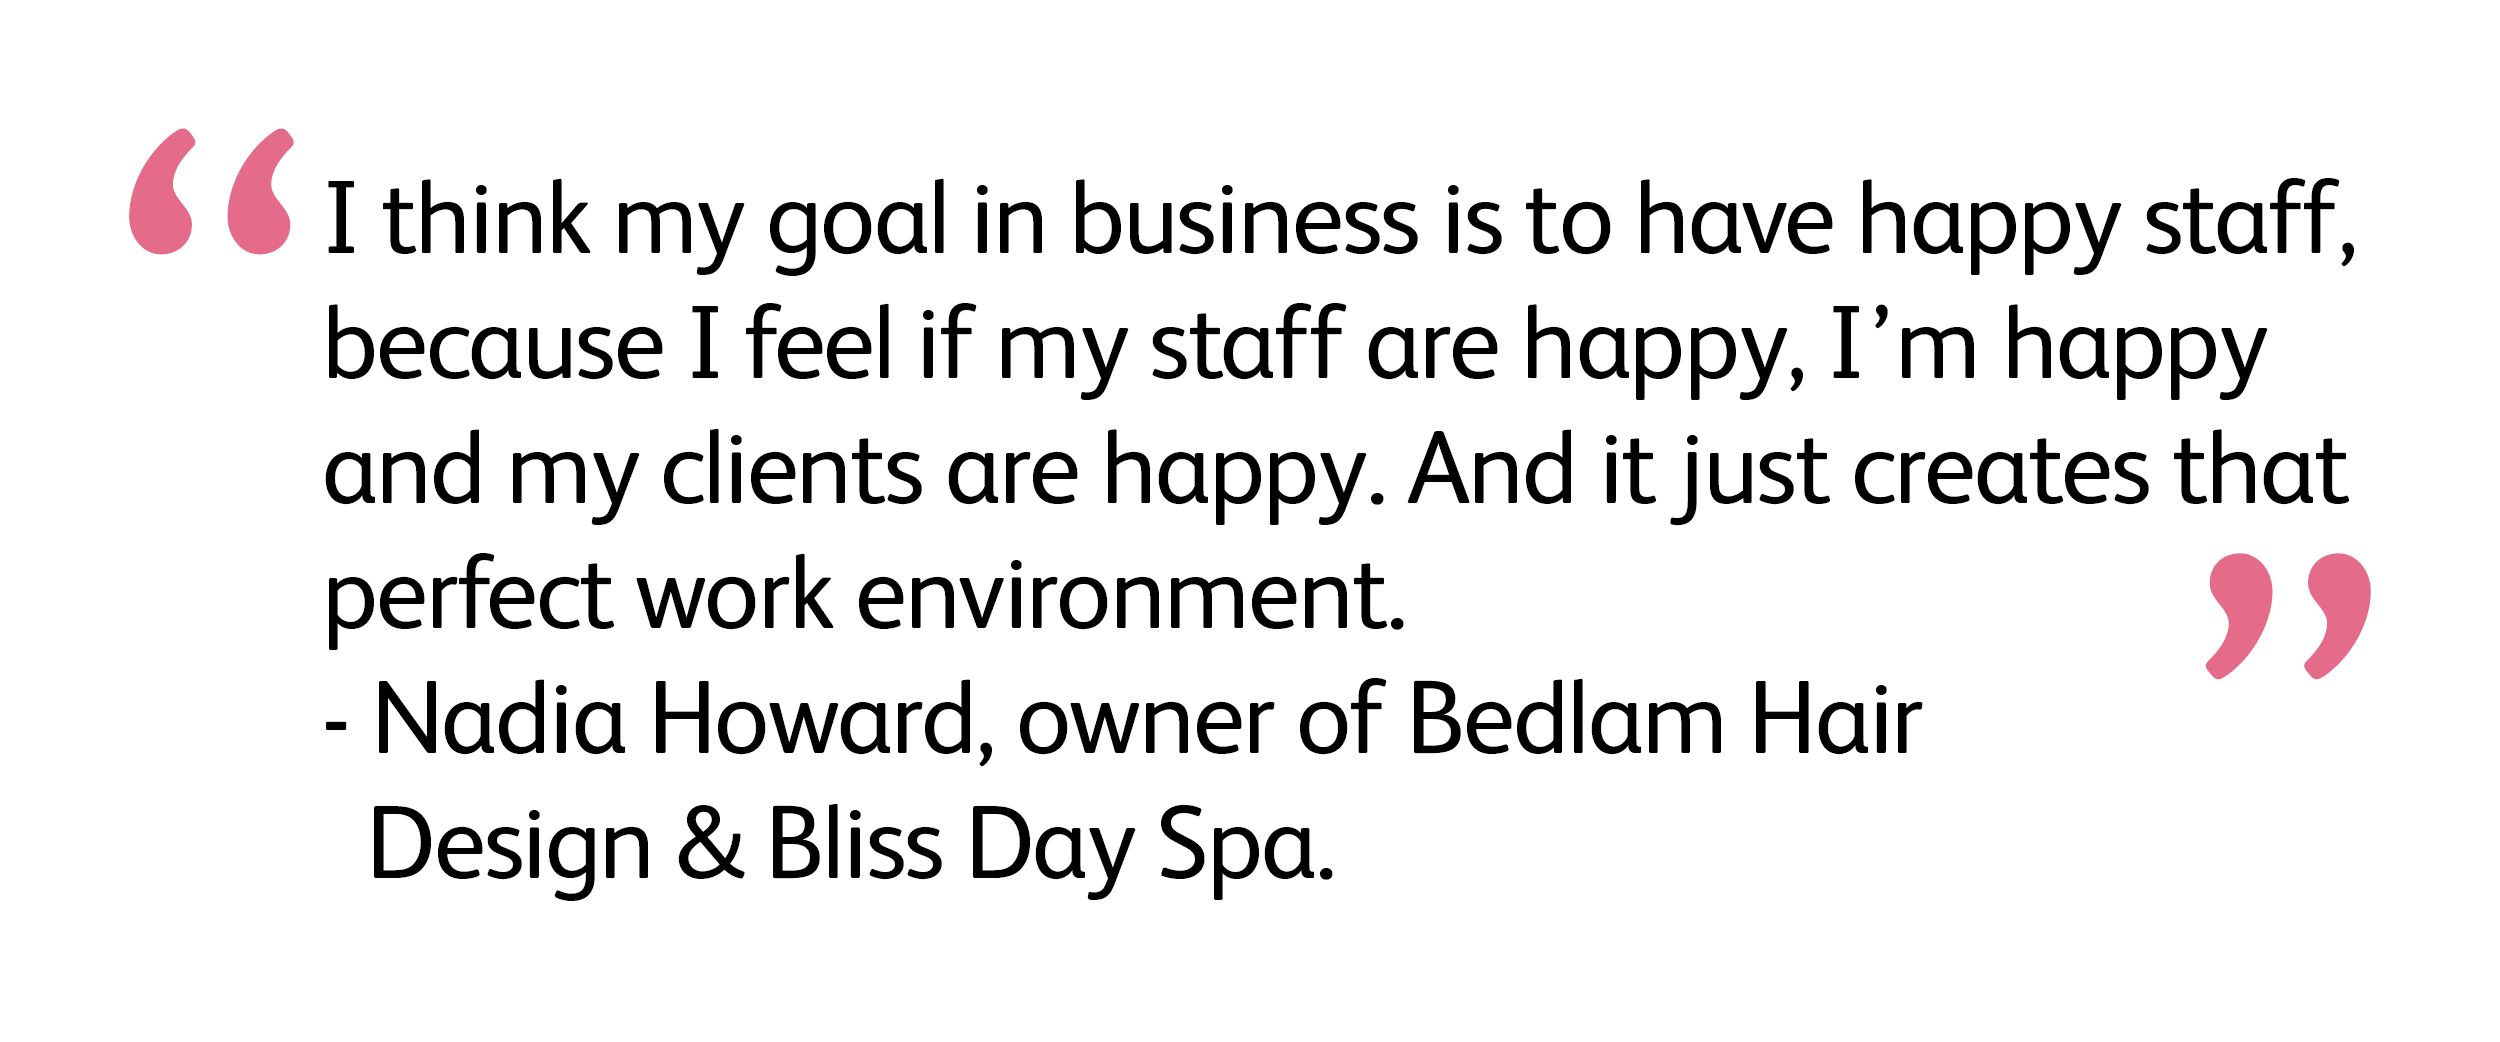 I think my goal in business is to have happy staff, because I feel if my staff are happy, I'm happy and my clients are happy. And it just creates that perfect work environment.